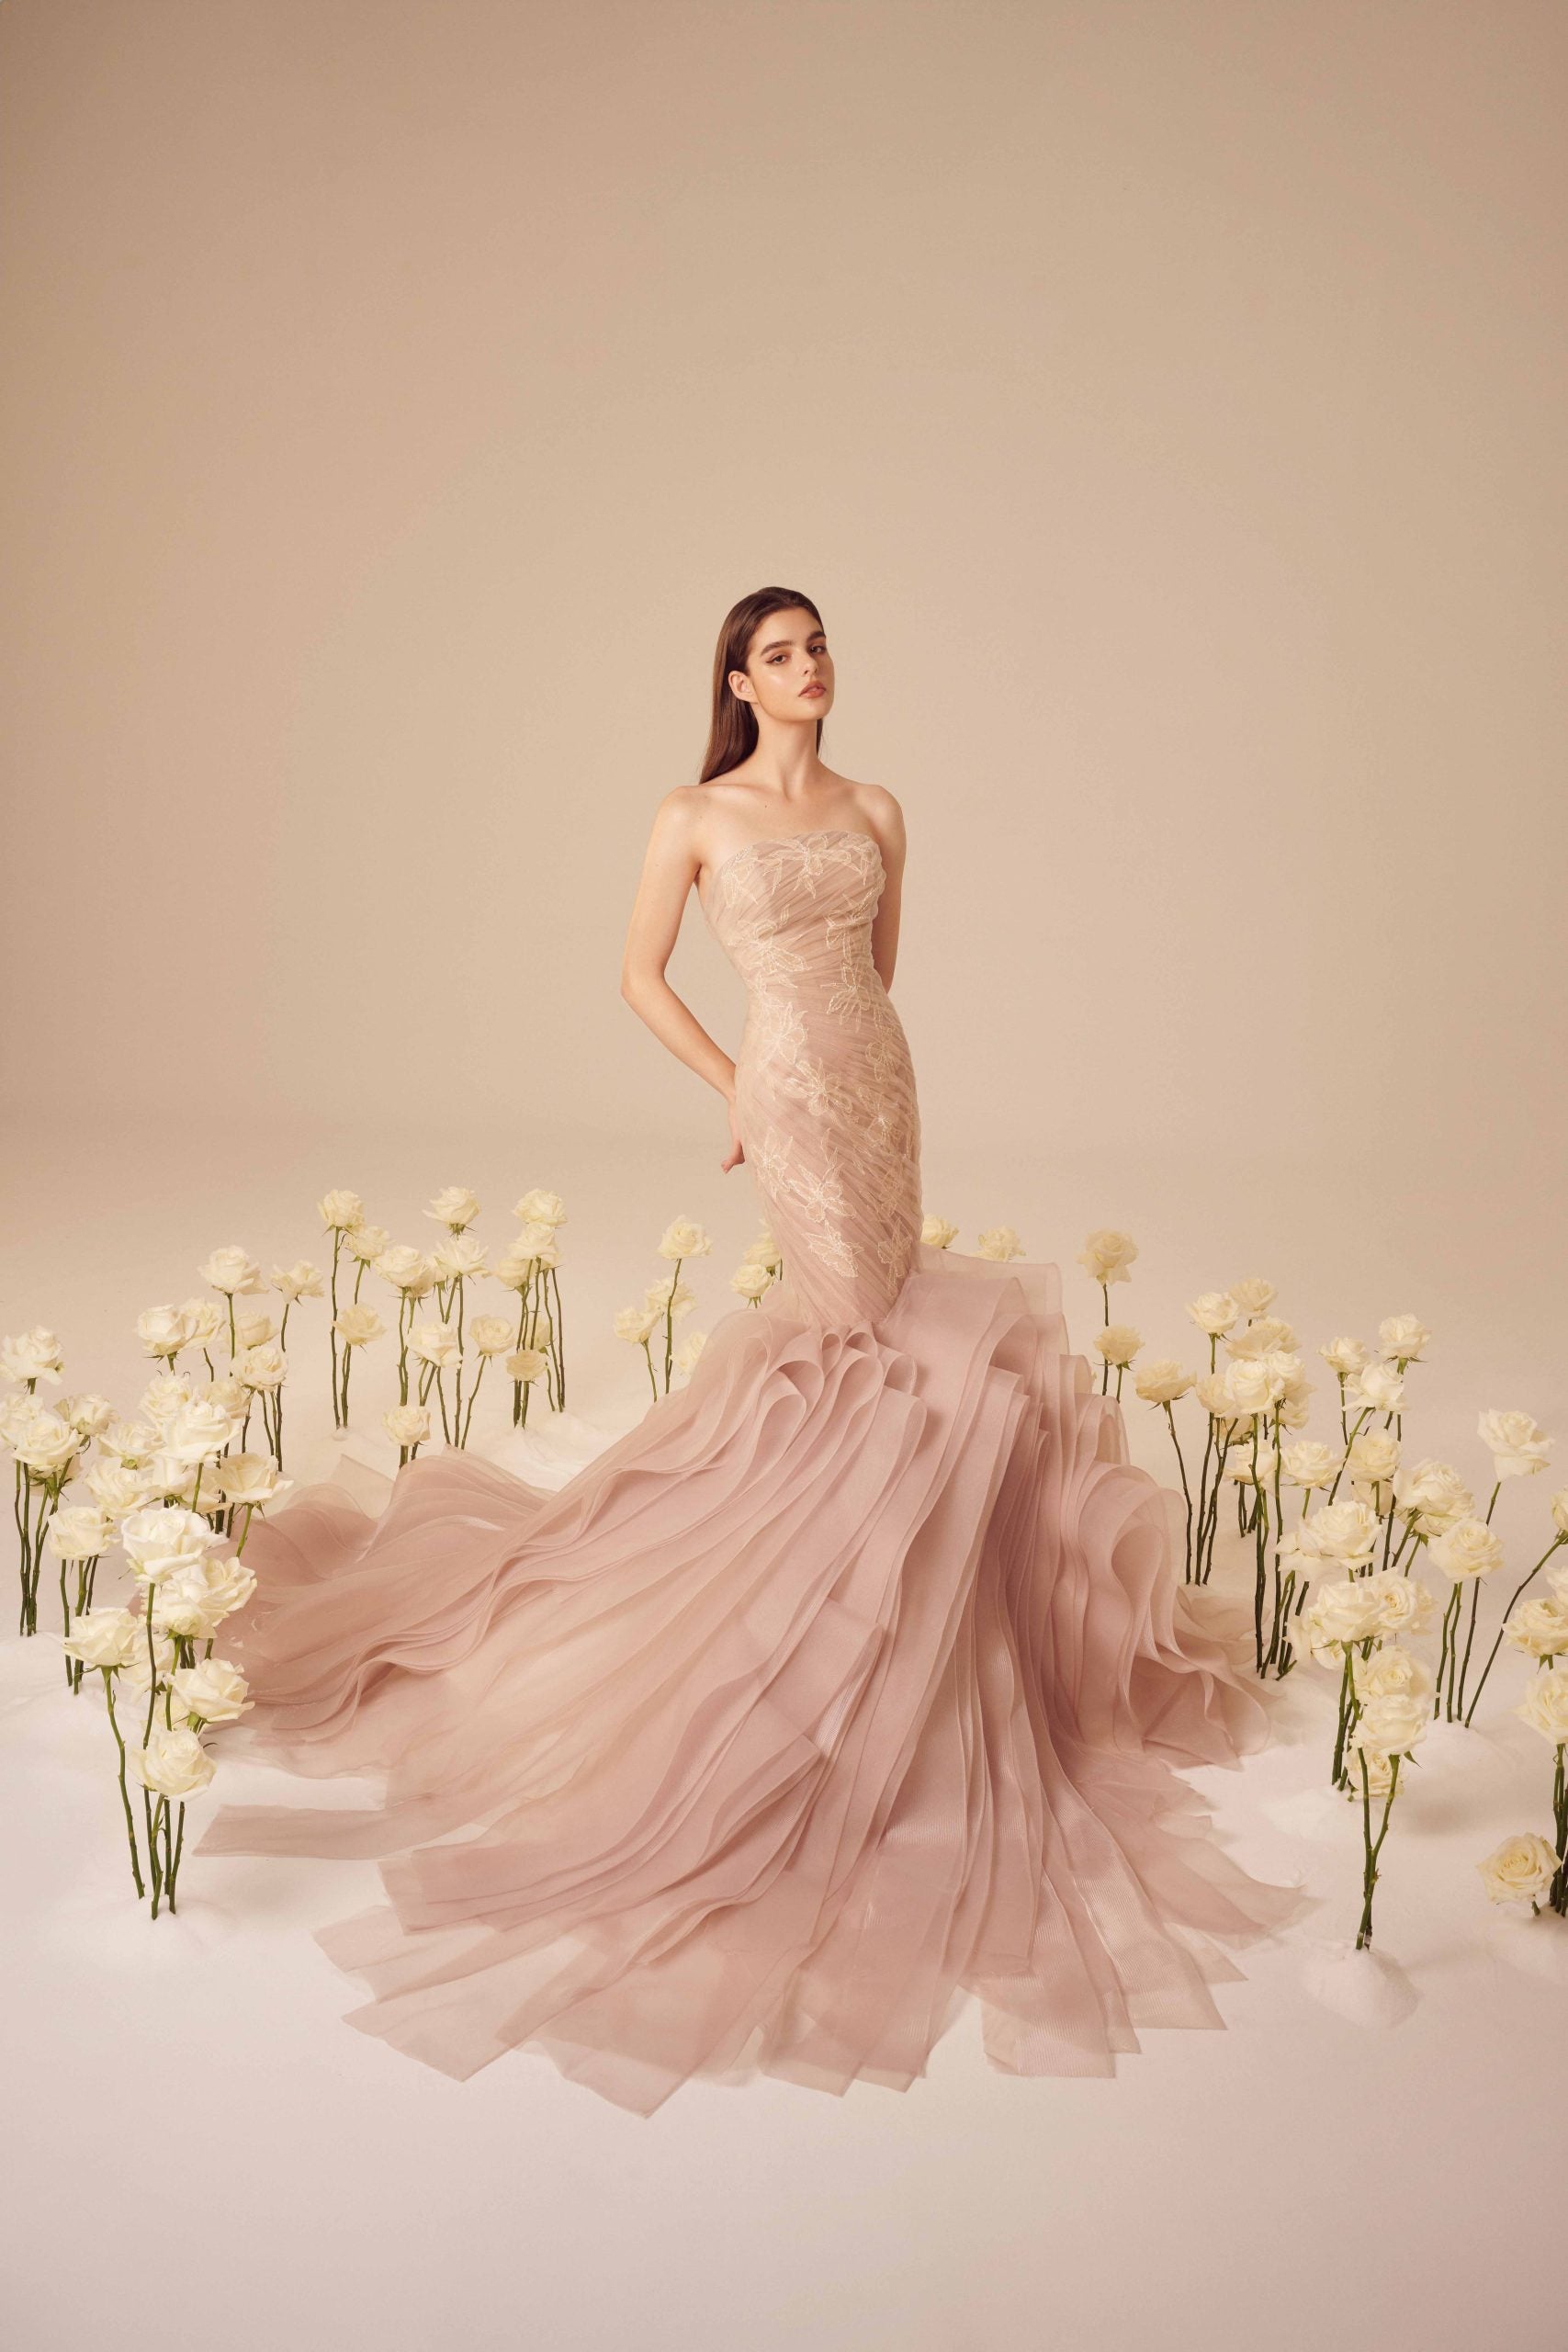 Blush Tulle And Lace-Adorned Mermaid Gown by Nicole + Felicia - Image 1